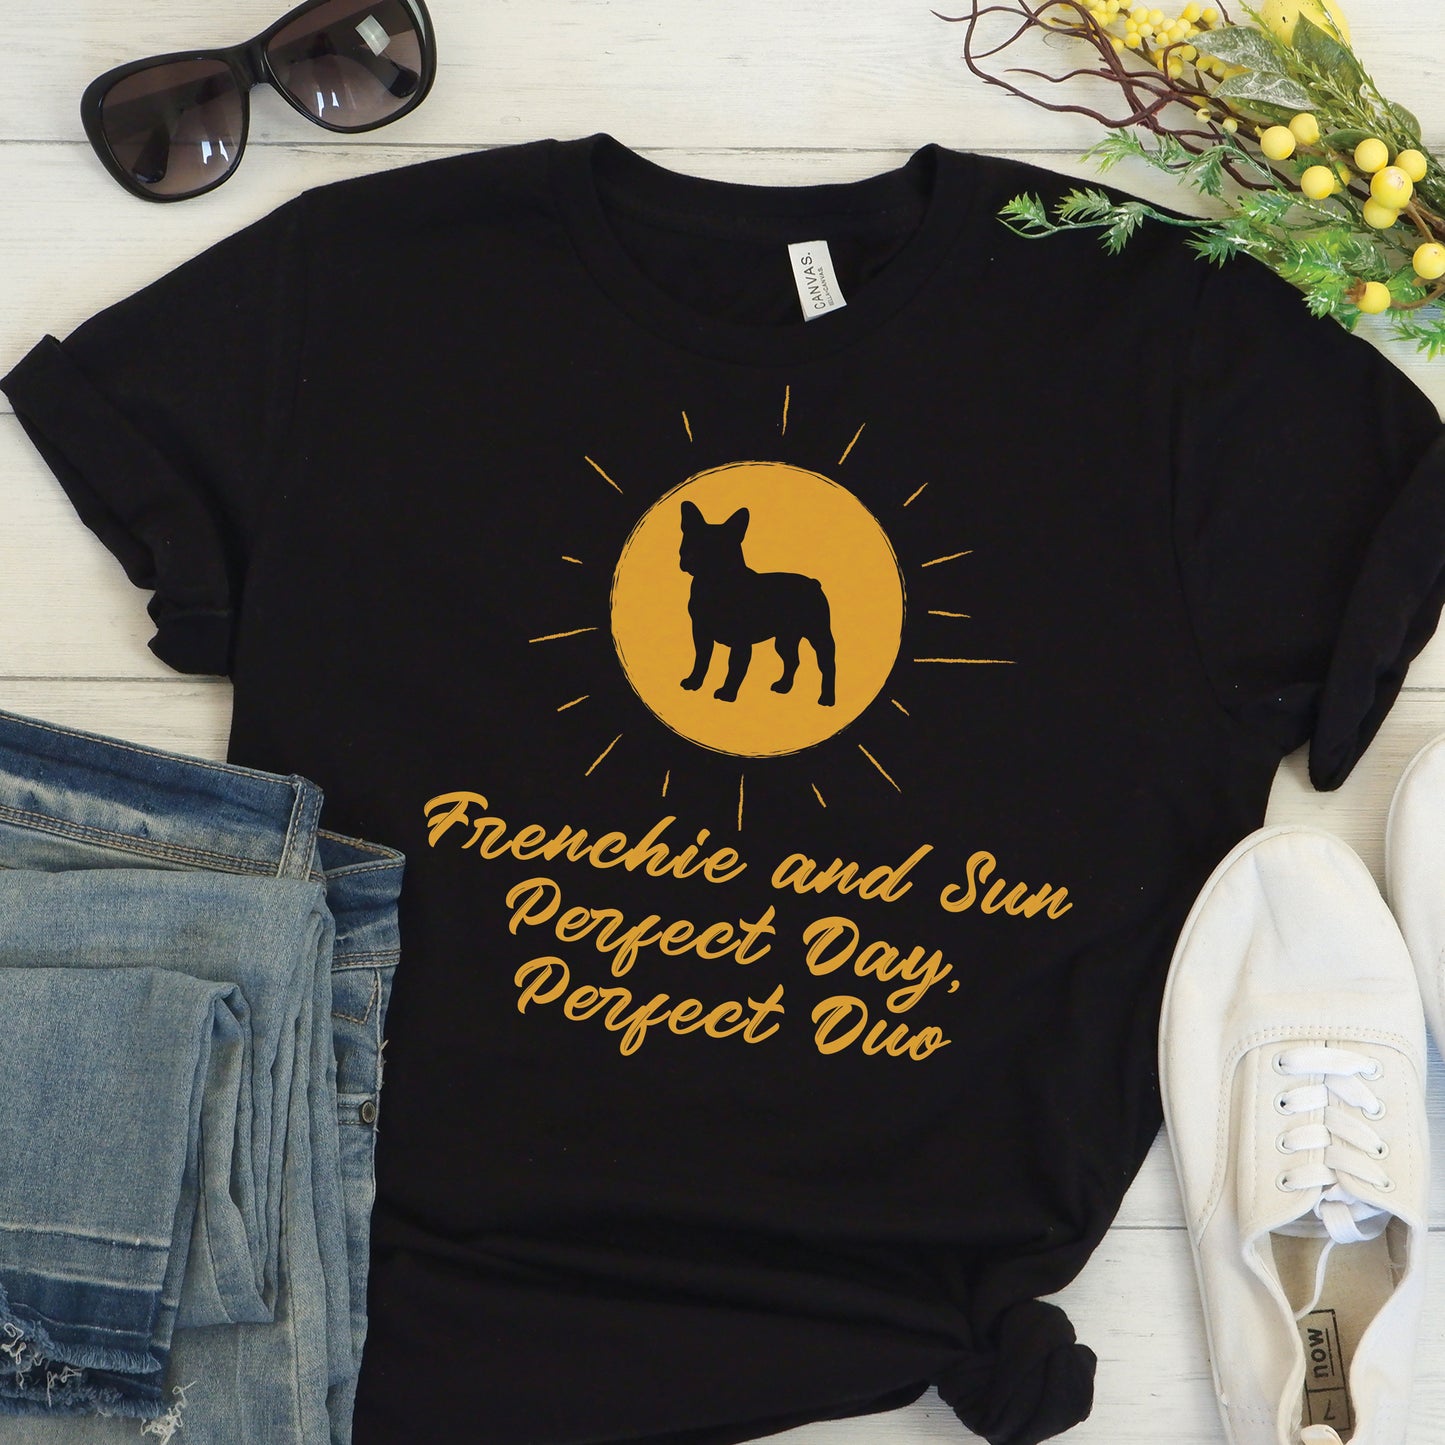 Frenchie and the sun - Unisex T-Shirt